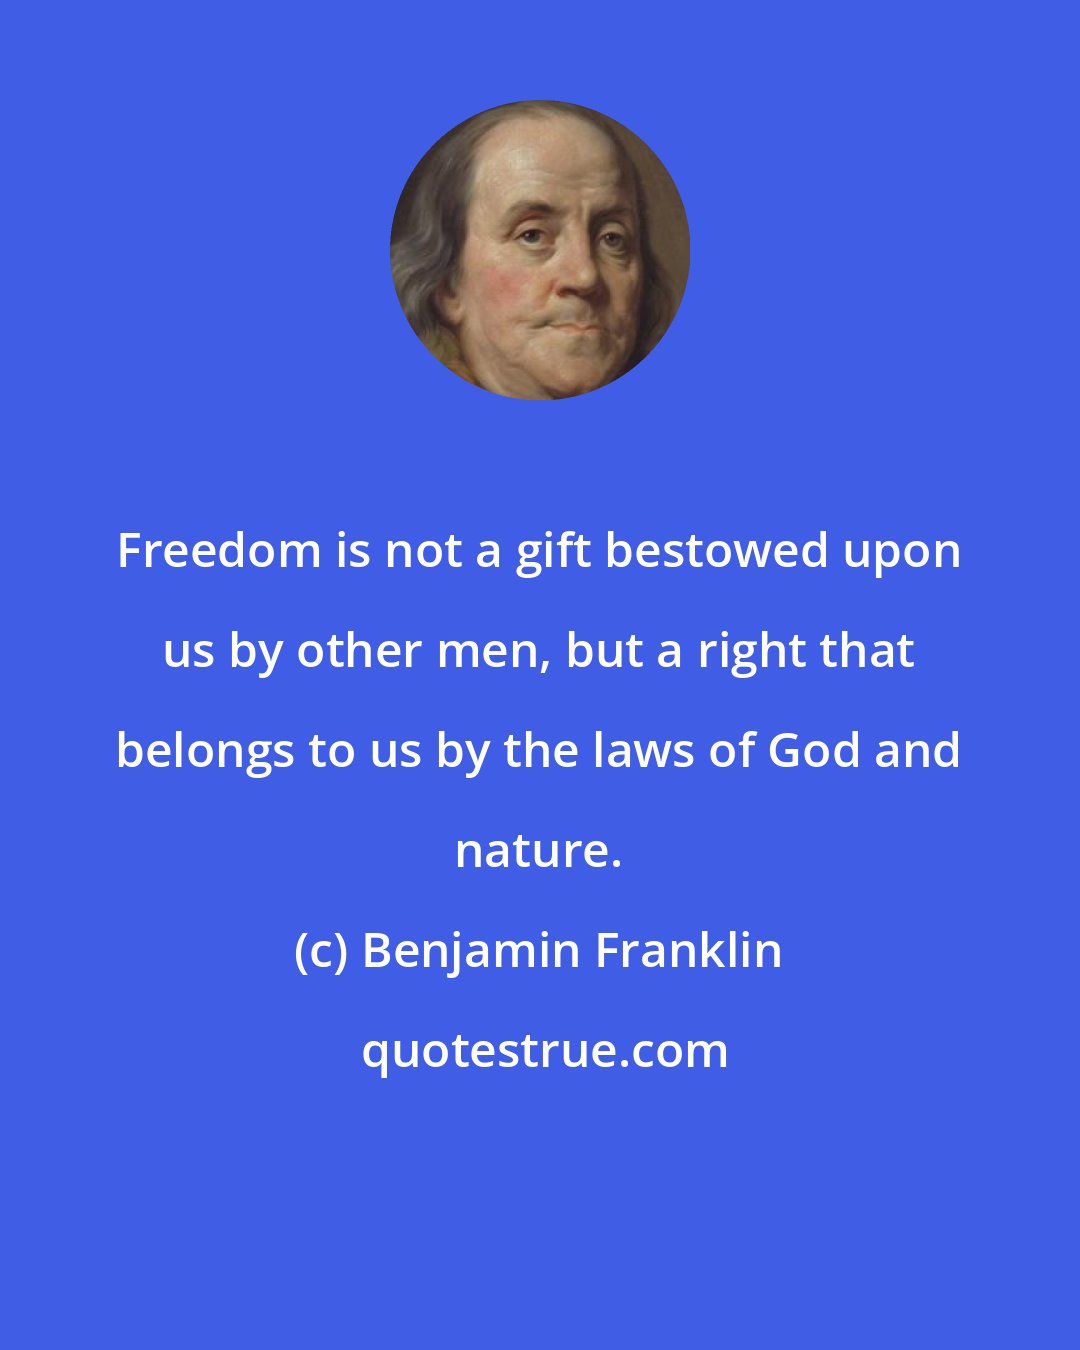 Benjamin Franklin: Freedom is not a gift bestowed upon us by other men, but a right that belongs to us by the laws of God and nature.